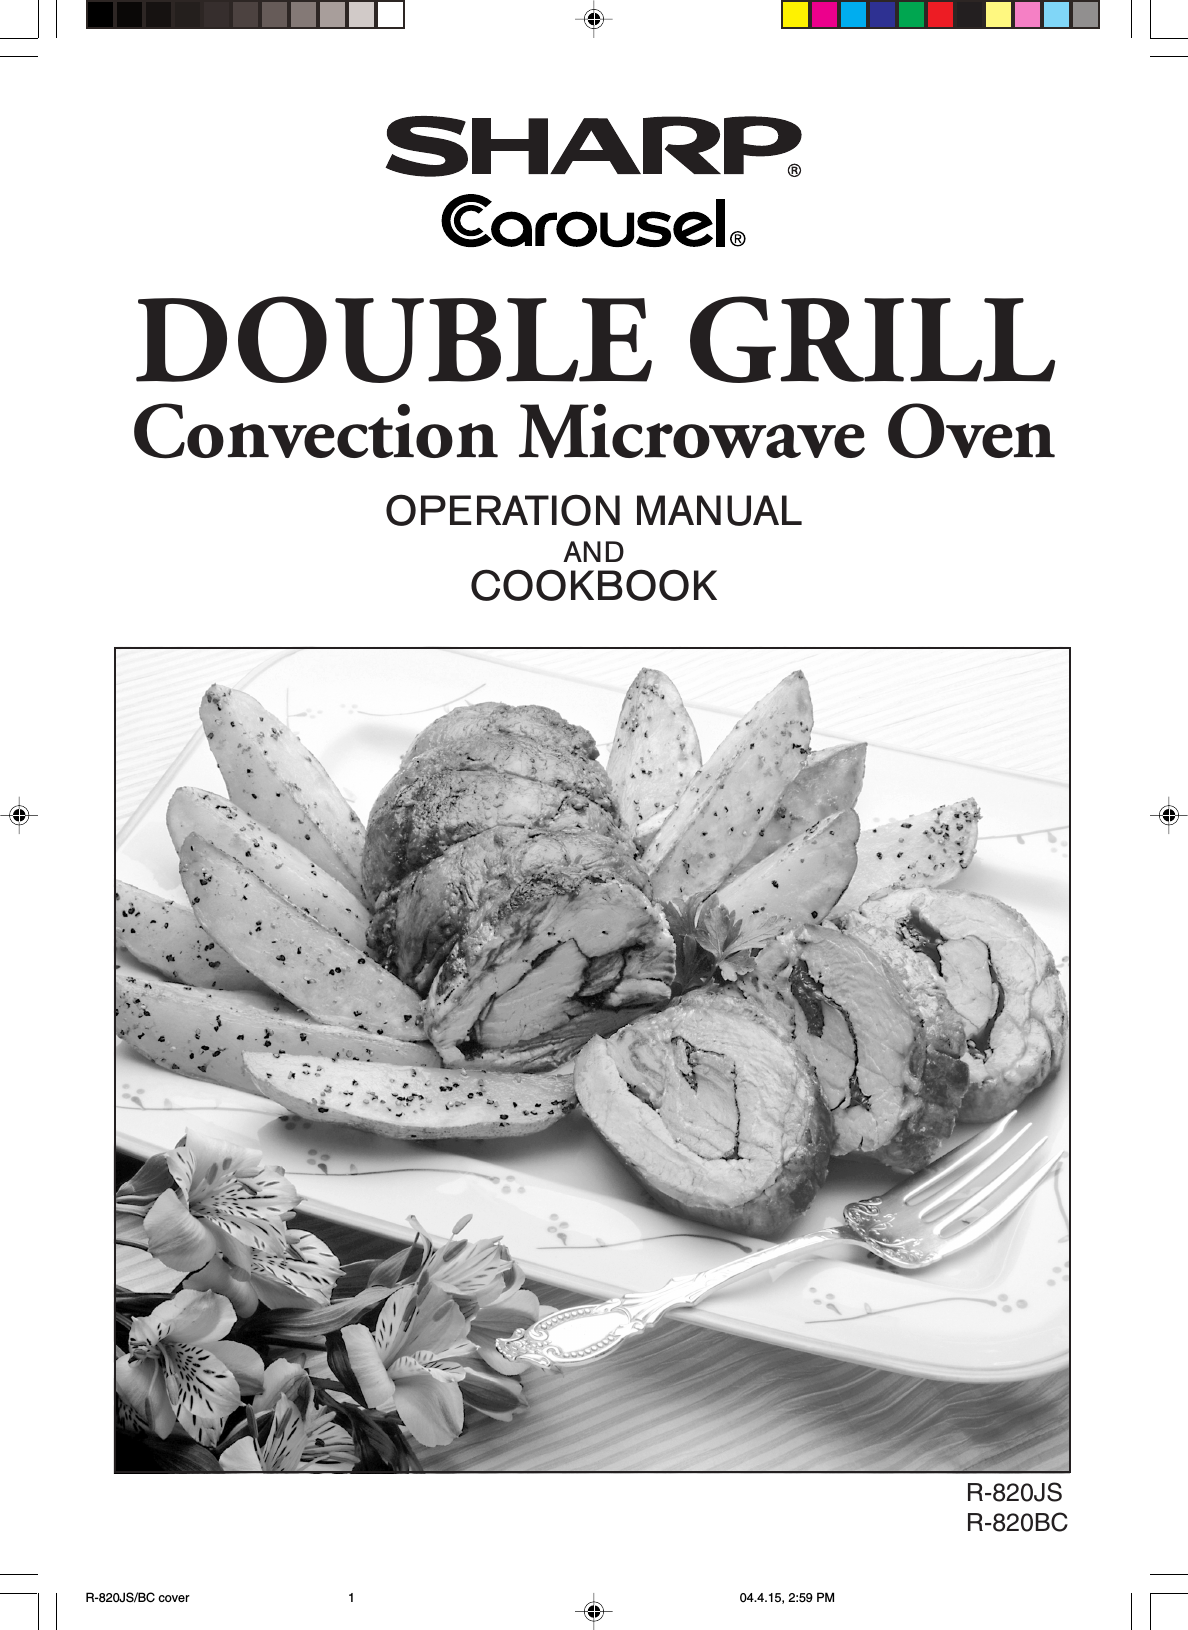 OPERATION MANUALANDCOOKBOOKDOUBLE GRILLConvection Microwave OvenR-820JSR-820BCR-820JS/BC cover 04.4.15, 2:59 PM1